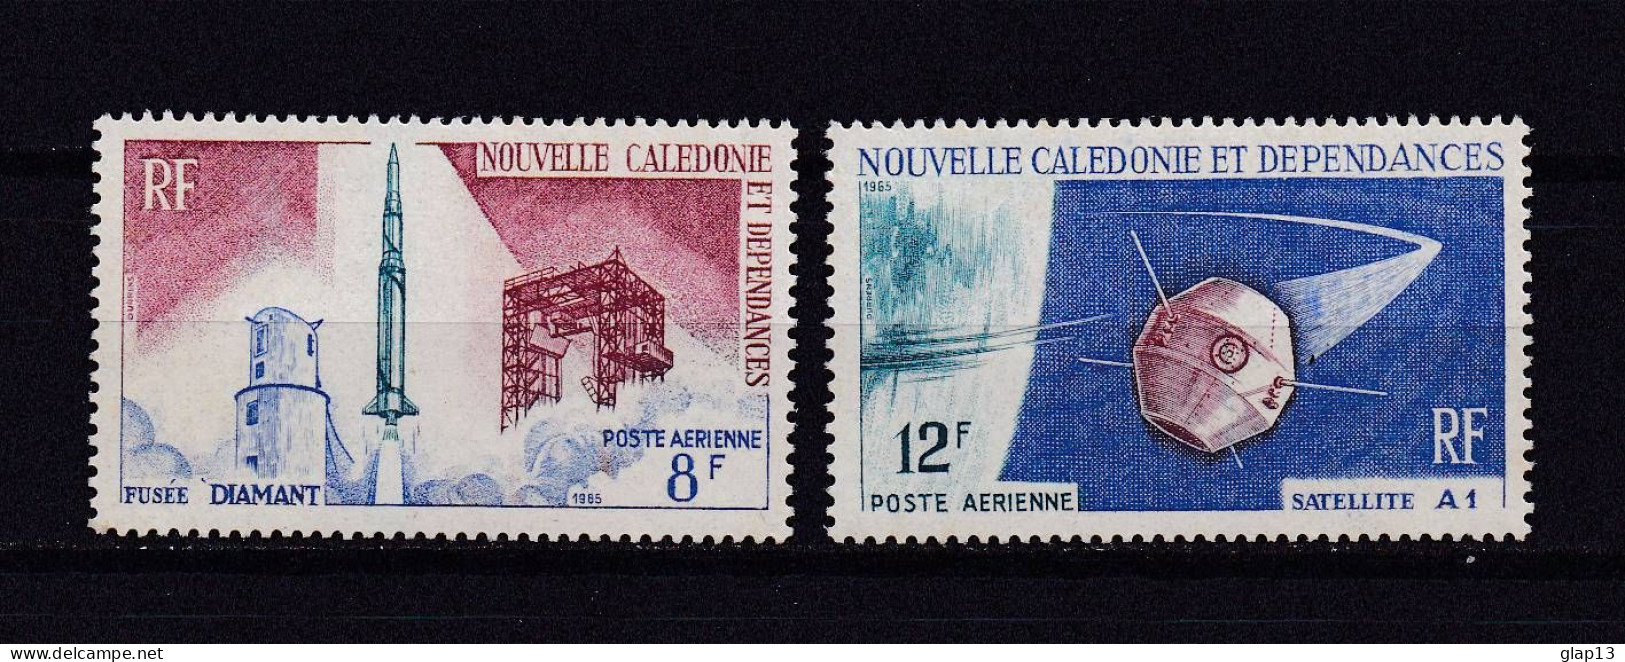 NOUVELLE-CALEDONIE 1966 PA N°84/85 NEUF AVEC CHARNIERE SATELLITE - Unused Stamps